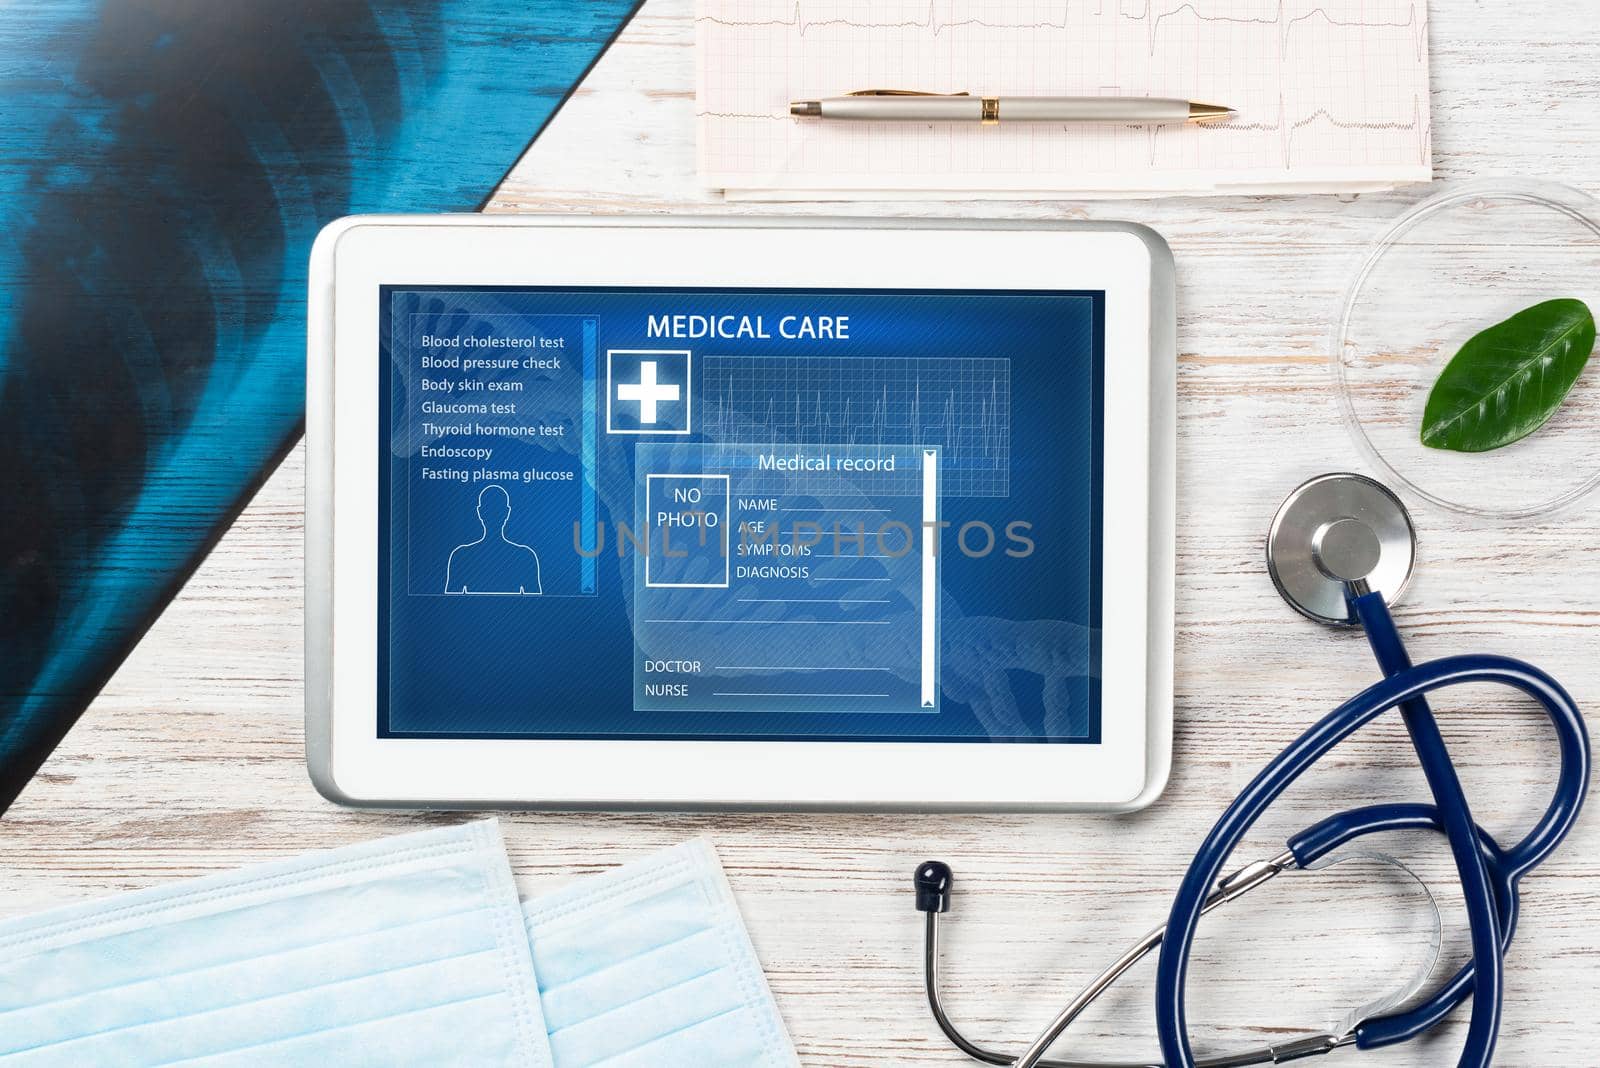 Laboratory patient examination in doctors office. Tablet computer with medical app interface on screen. Stethoscope, x-ray image and cardiogram on wooden desk. Medical diagnostics and examination